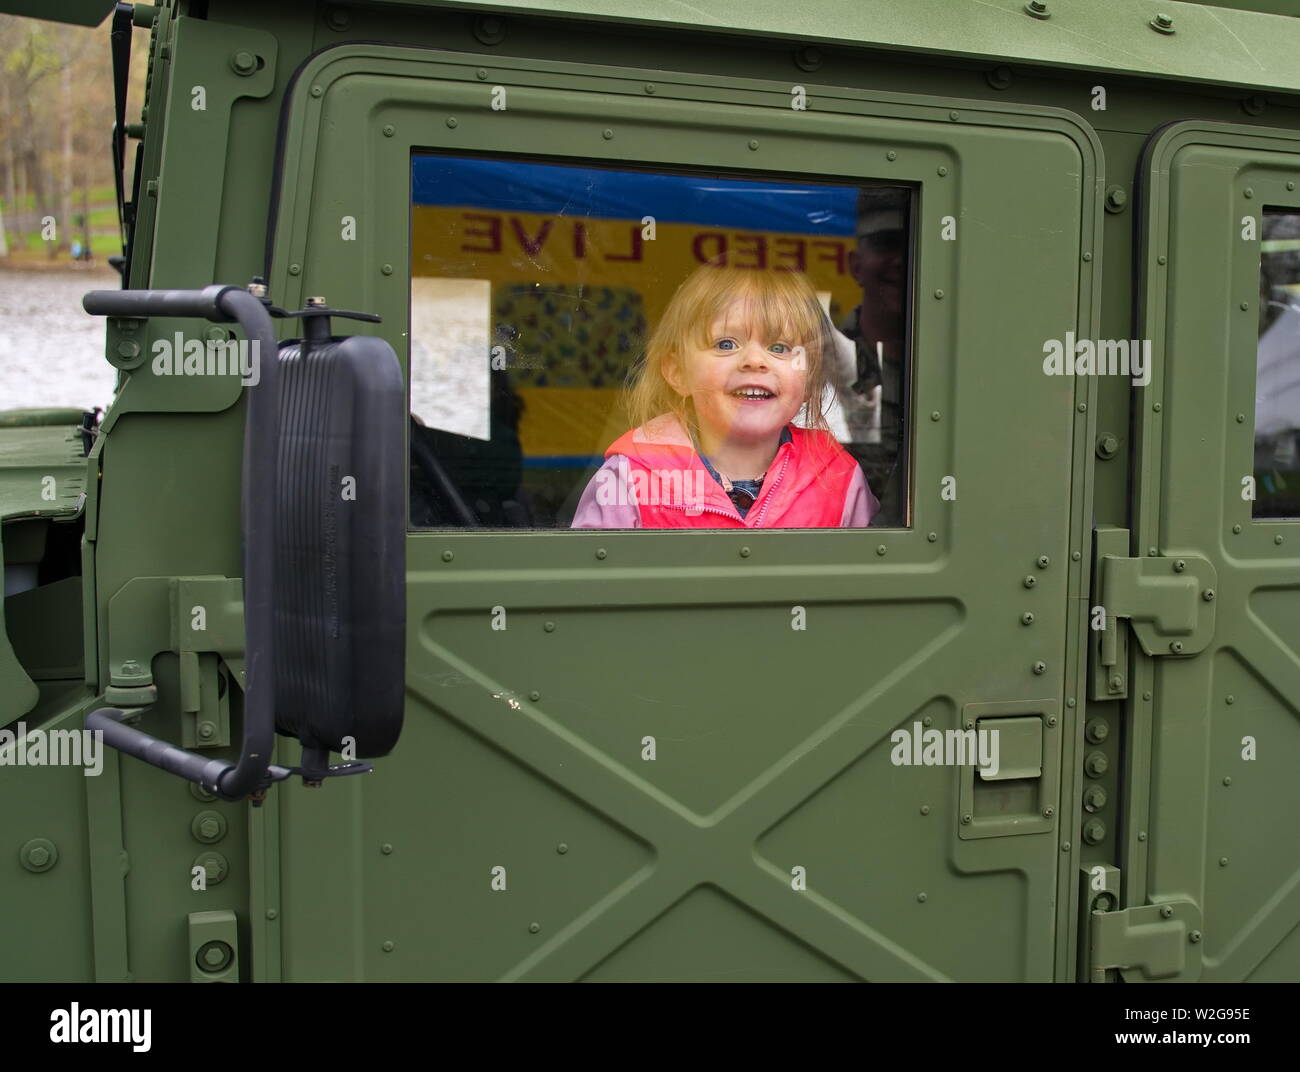 Meriden, CT USA. Apr 2019. Daffodil Festival. Young girl inside a military Humvee smiling at soldier dad. Stock Photo